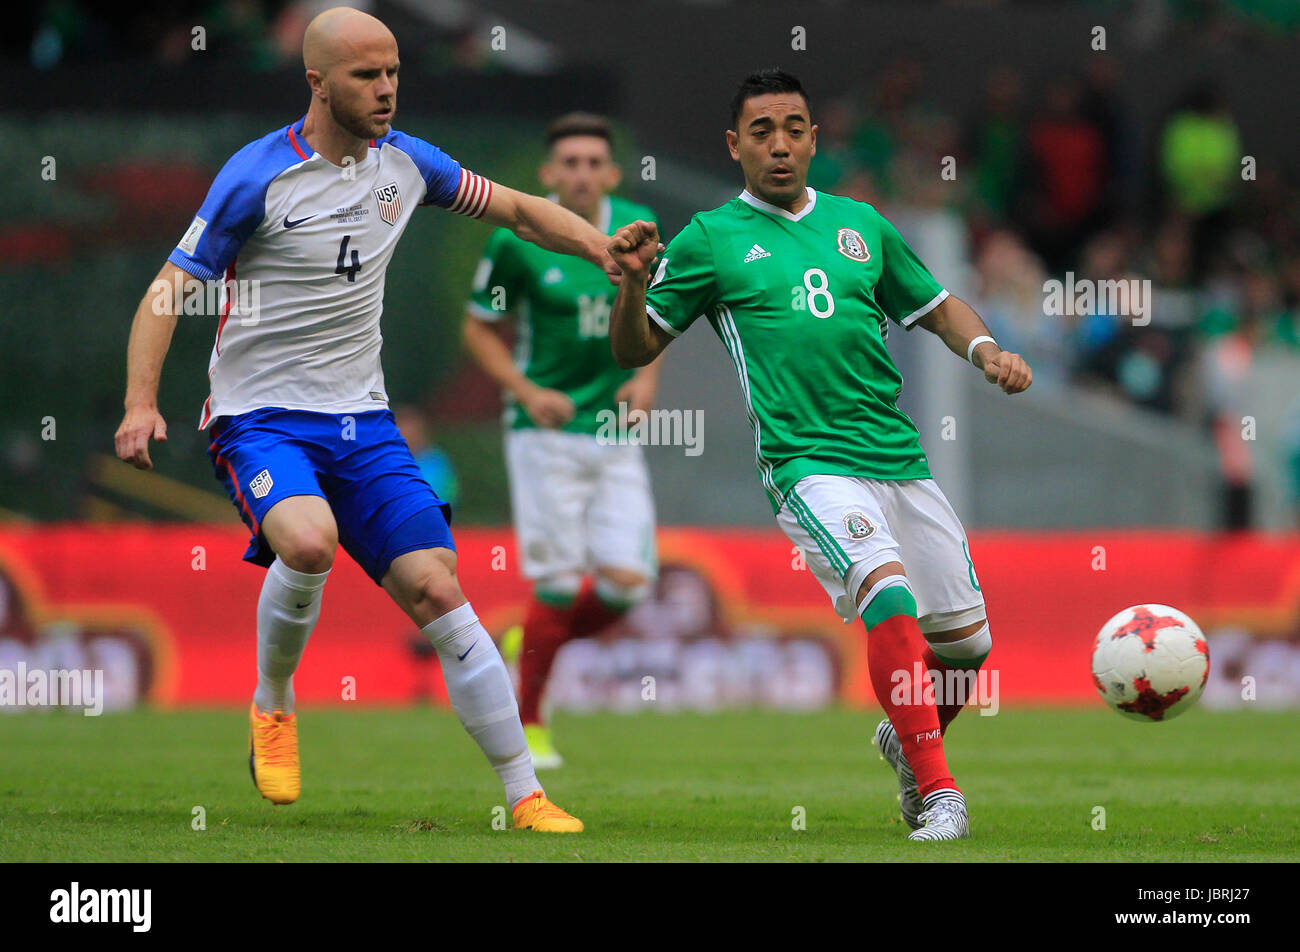 Mexico City, Mexico. 11th June, 2017. Mexico's Marco Fabian (R) vies for the ball during a World Cup soccer qualifying match in the Azteca Stadium, in Mexico City, capital of Mexico, on June 11, 2017. The match ended in a 1-1 tie. Credit: Str/Xinhua/Alamy Live News Stock Photo